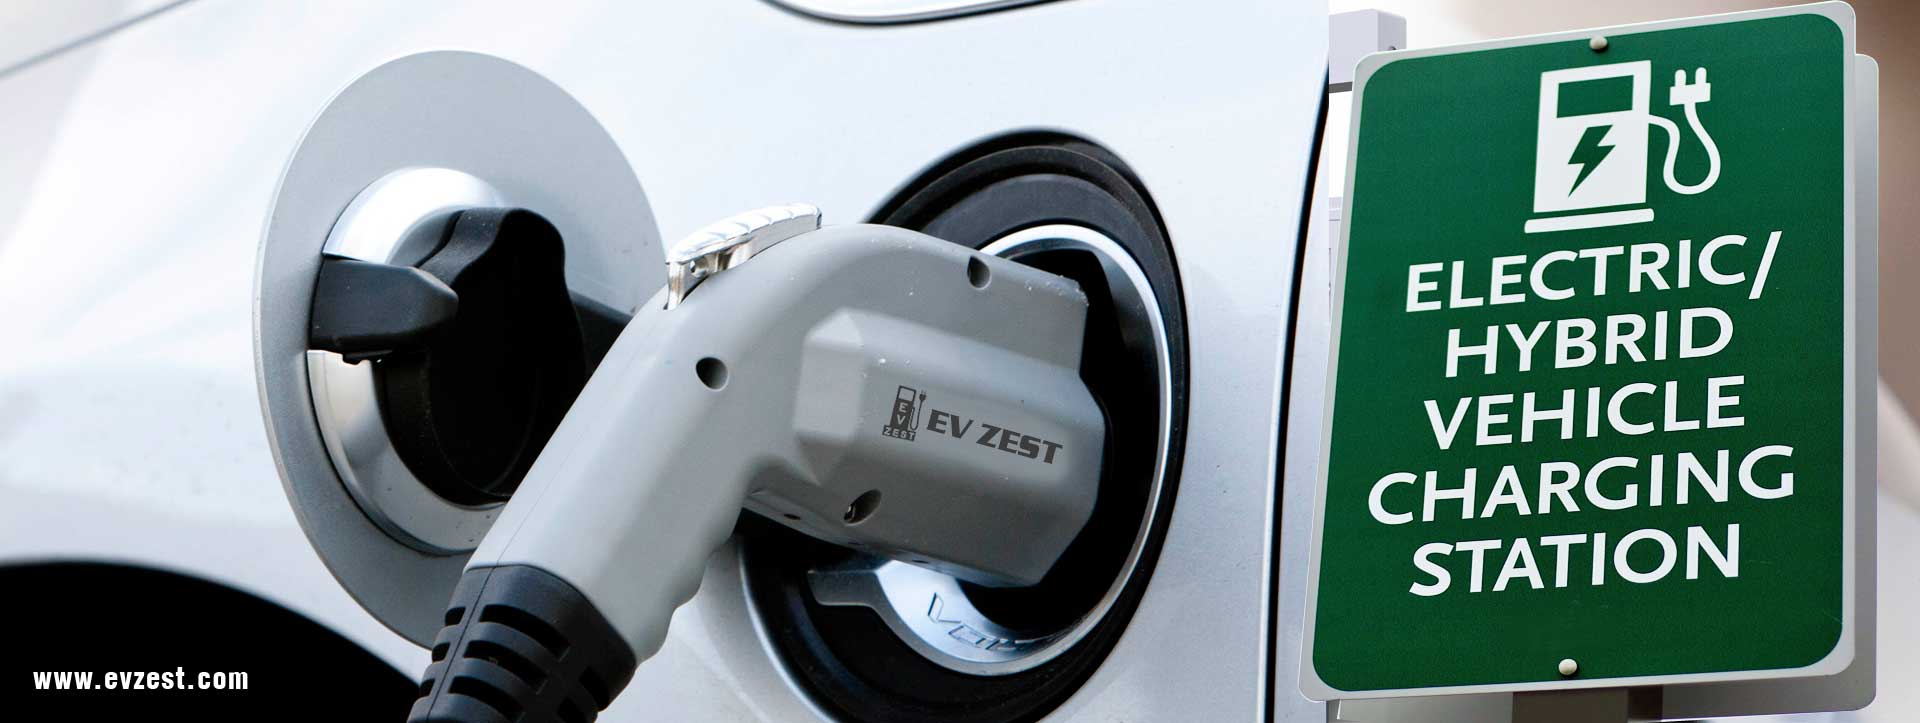 How Automobile Industry can be Normalized for Electric Vehicles?